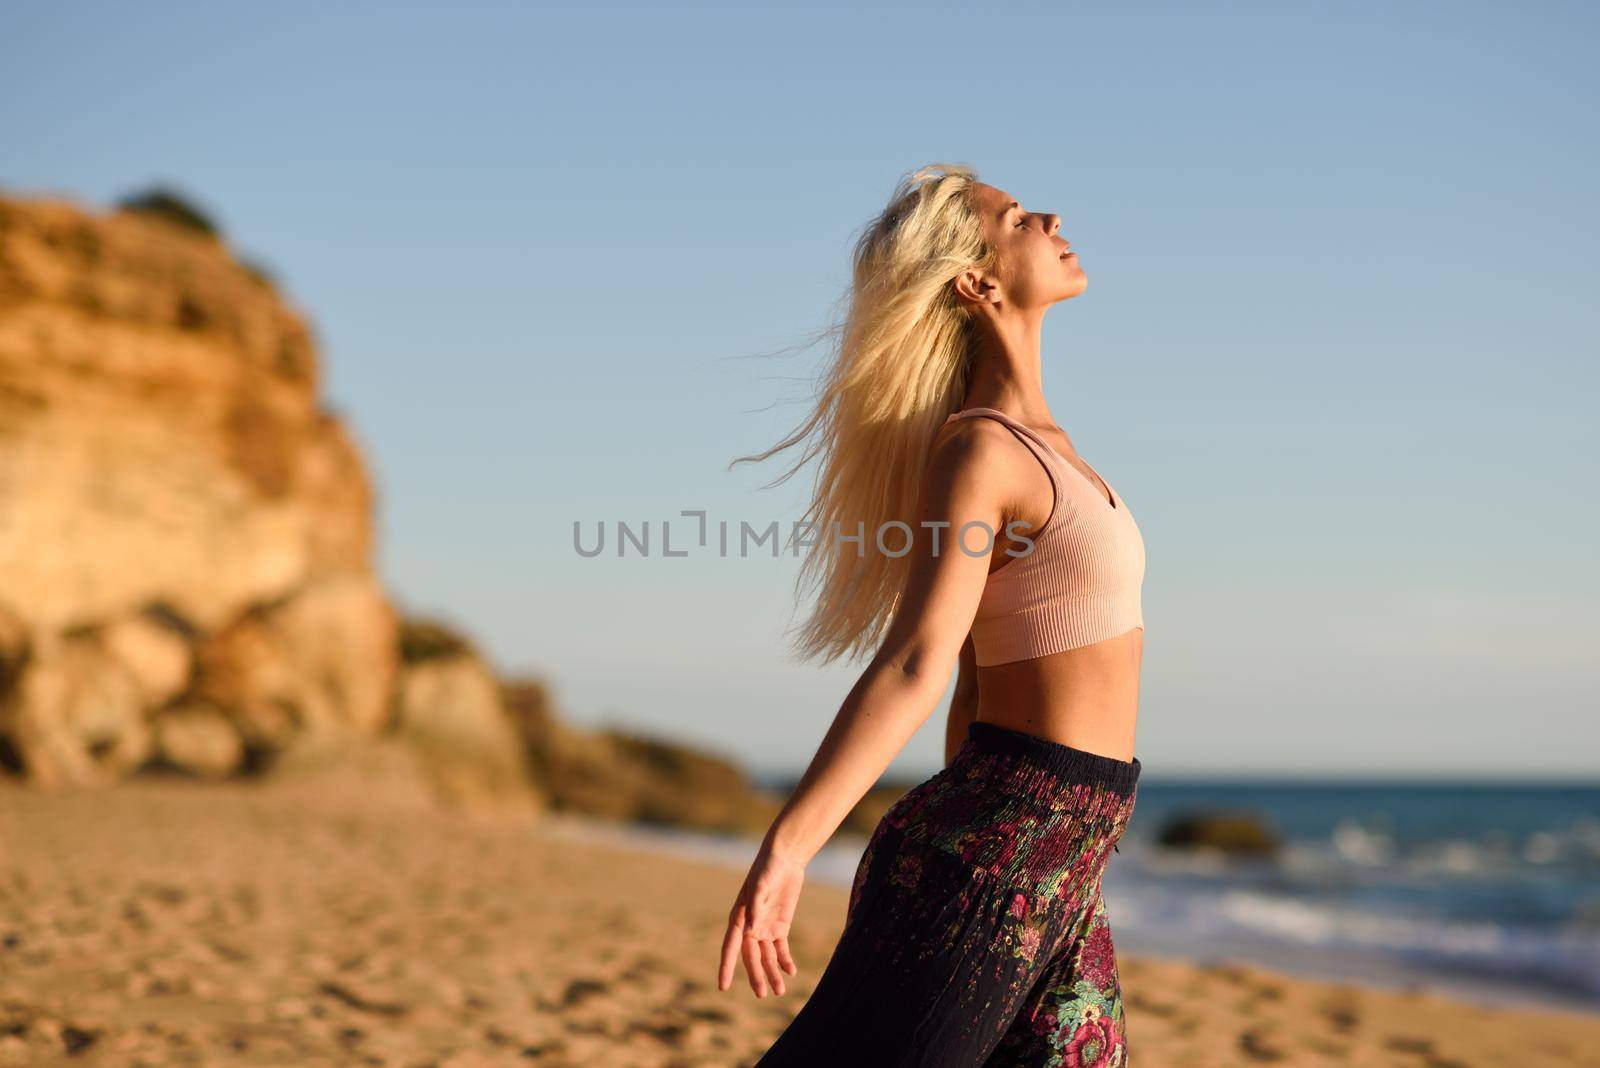 Woman enjoying the sunset on a beautiful beach in Cadiz, Andalusia, Spain. Young female opening arms and breathing the sea air.